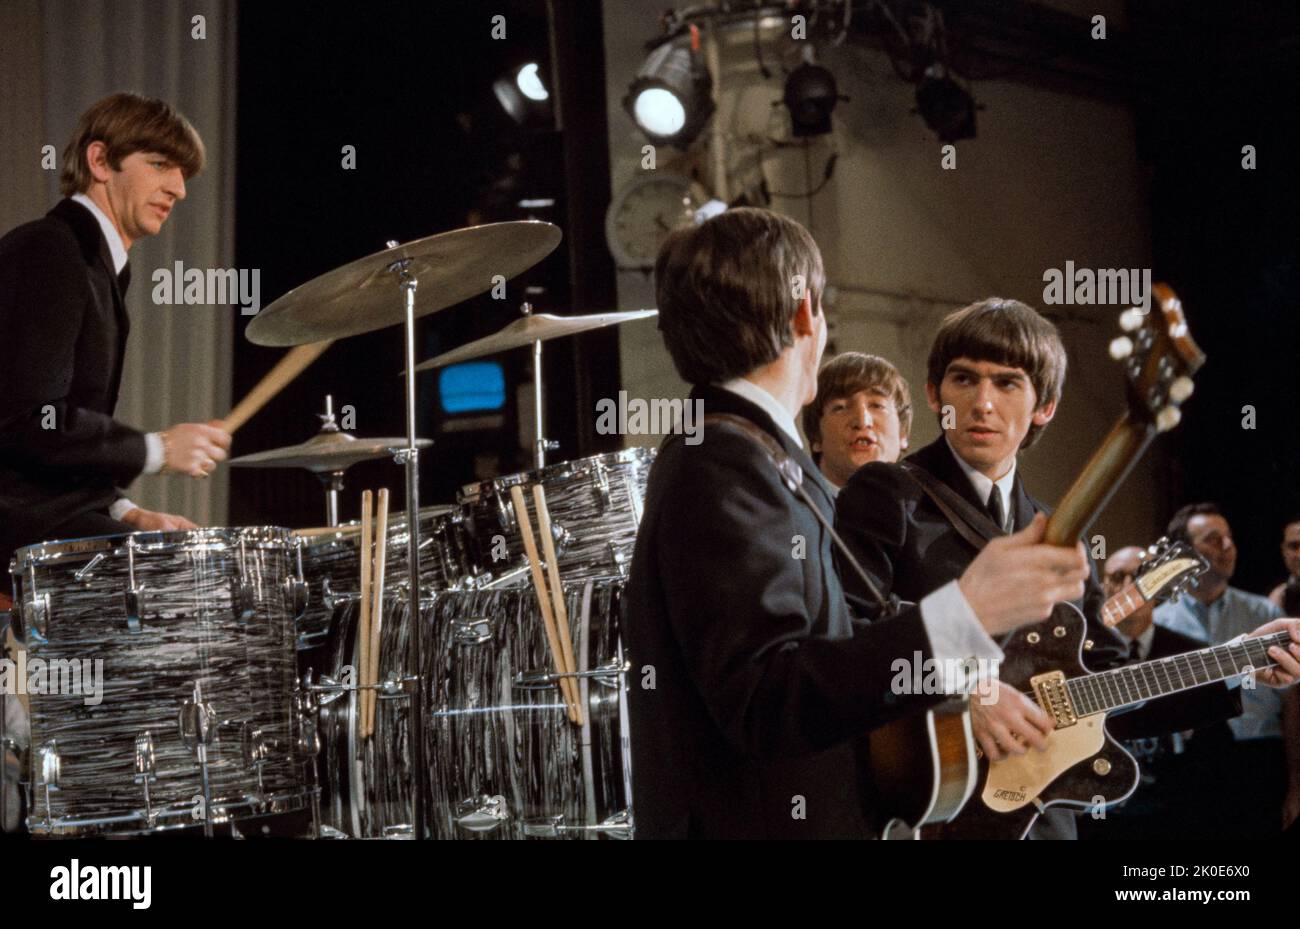 1964 United States tour by the Beatles, an English rock band formed in Liverpool in 1960. The group, whose best-known line-up comprised John Lennon, Paul McCartney, George Harrison and Ringo Starr, are regarded as the most influential band of all time. Stock Photo